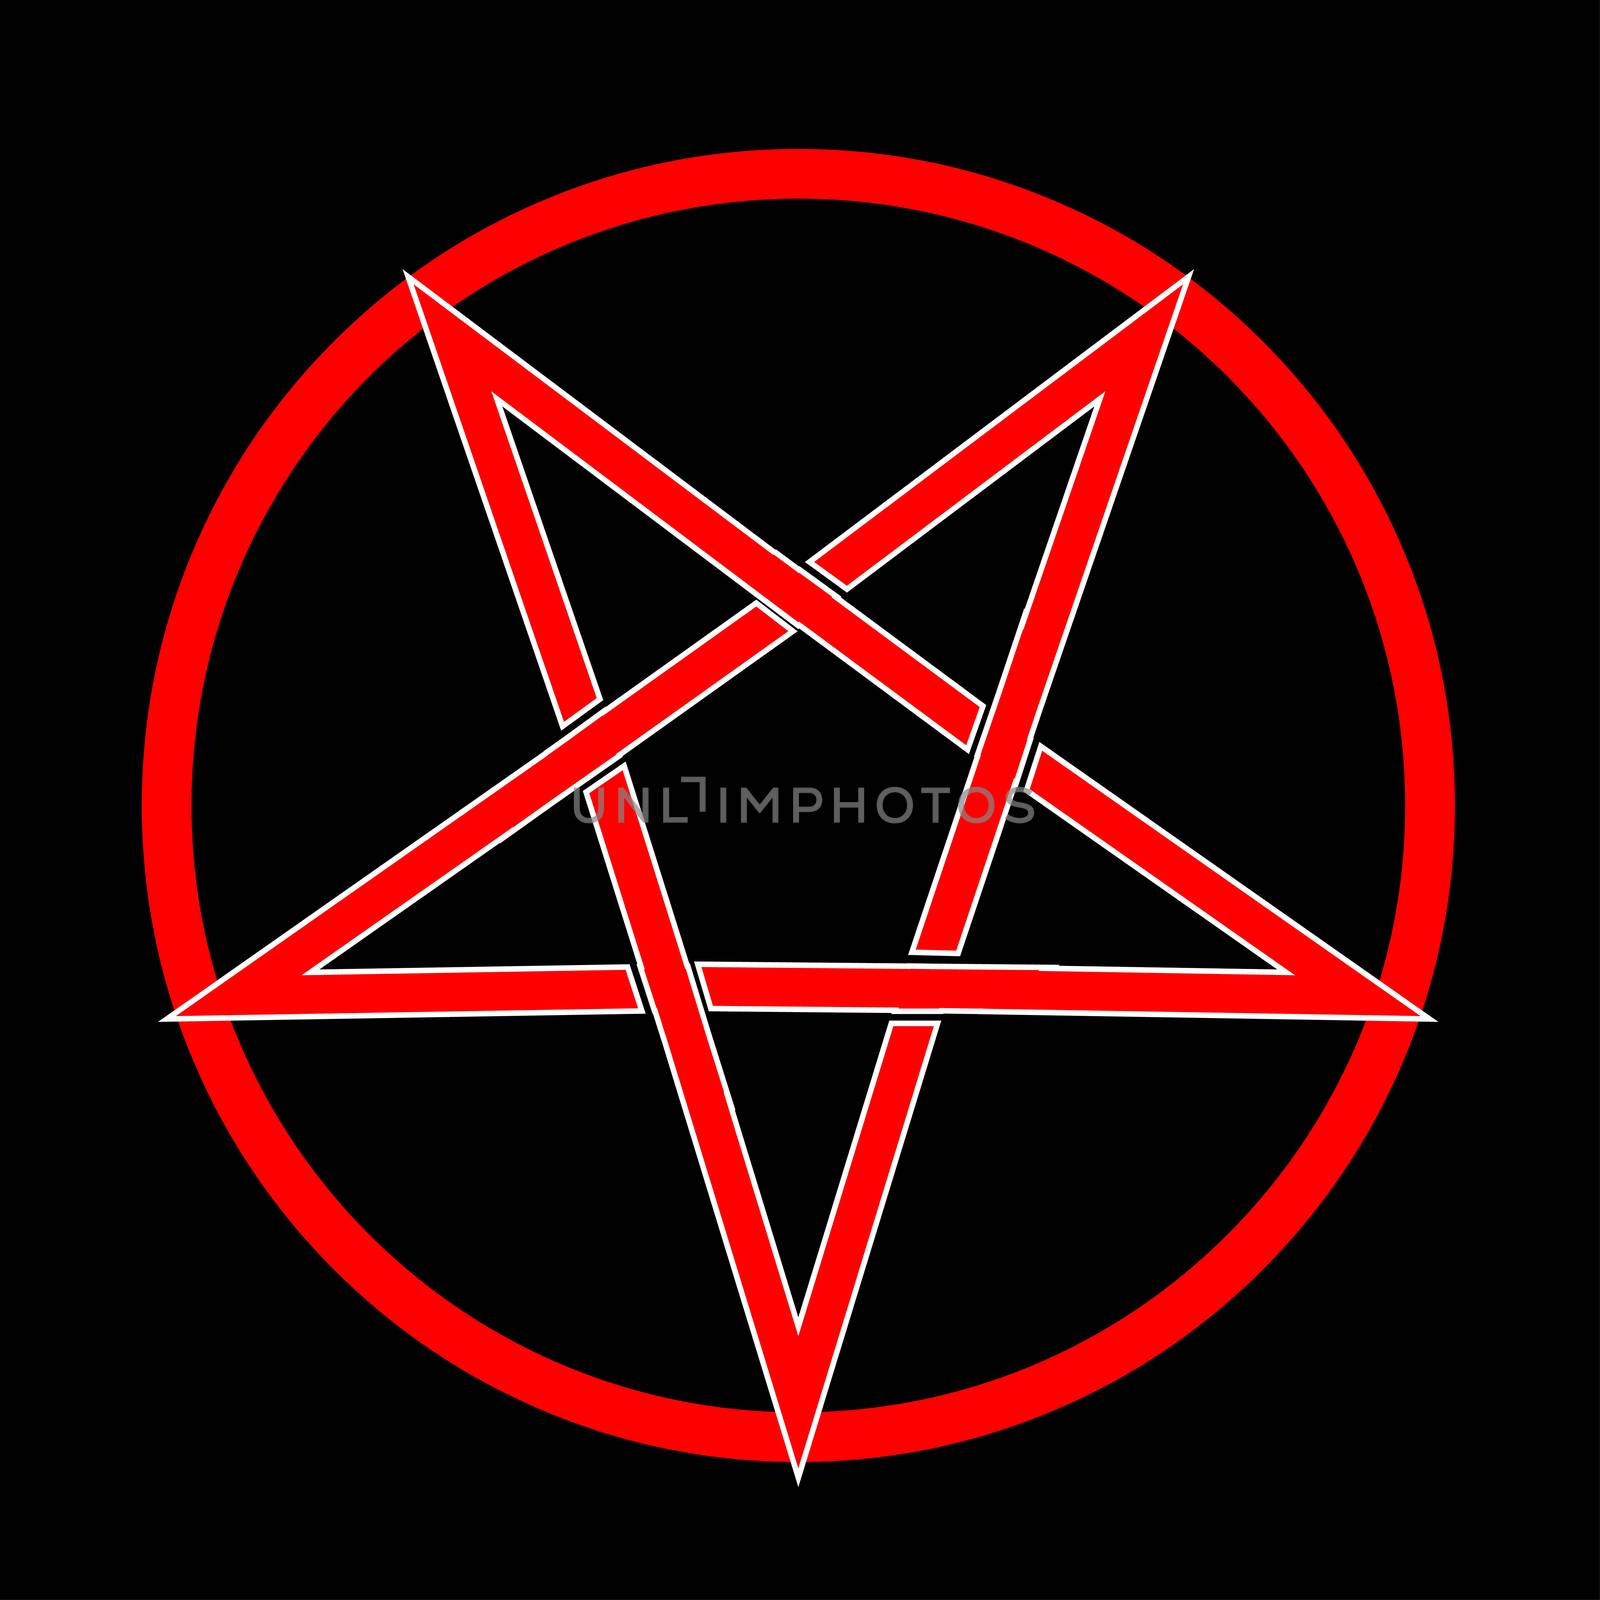 The five pointed pentagram over a black background